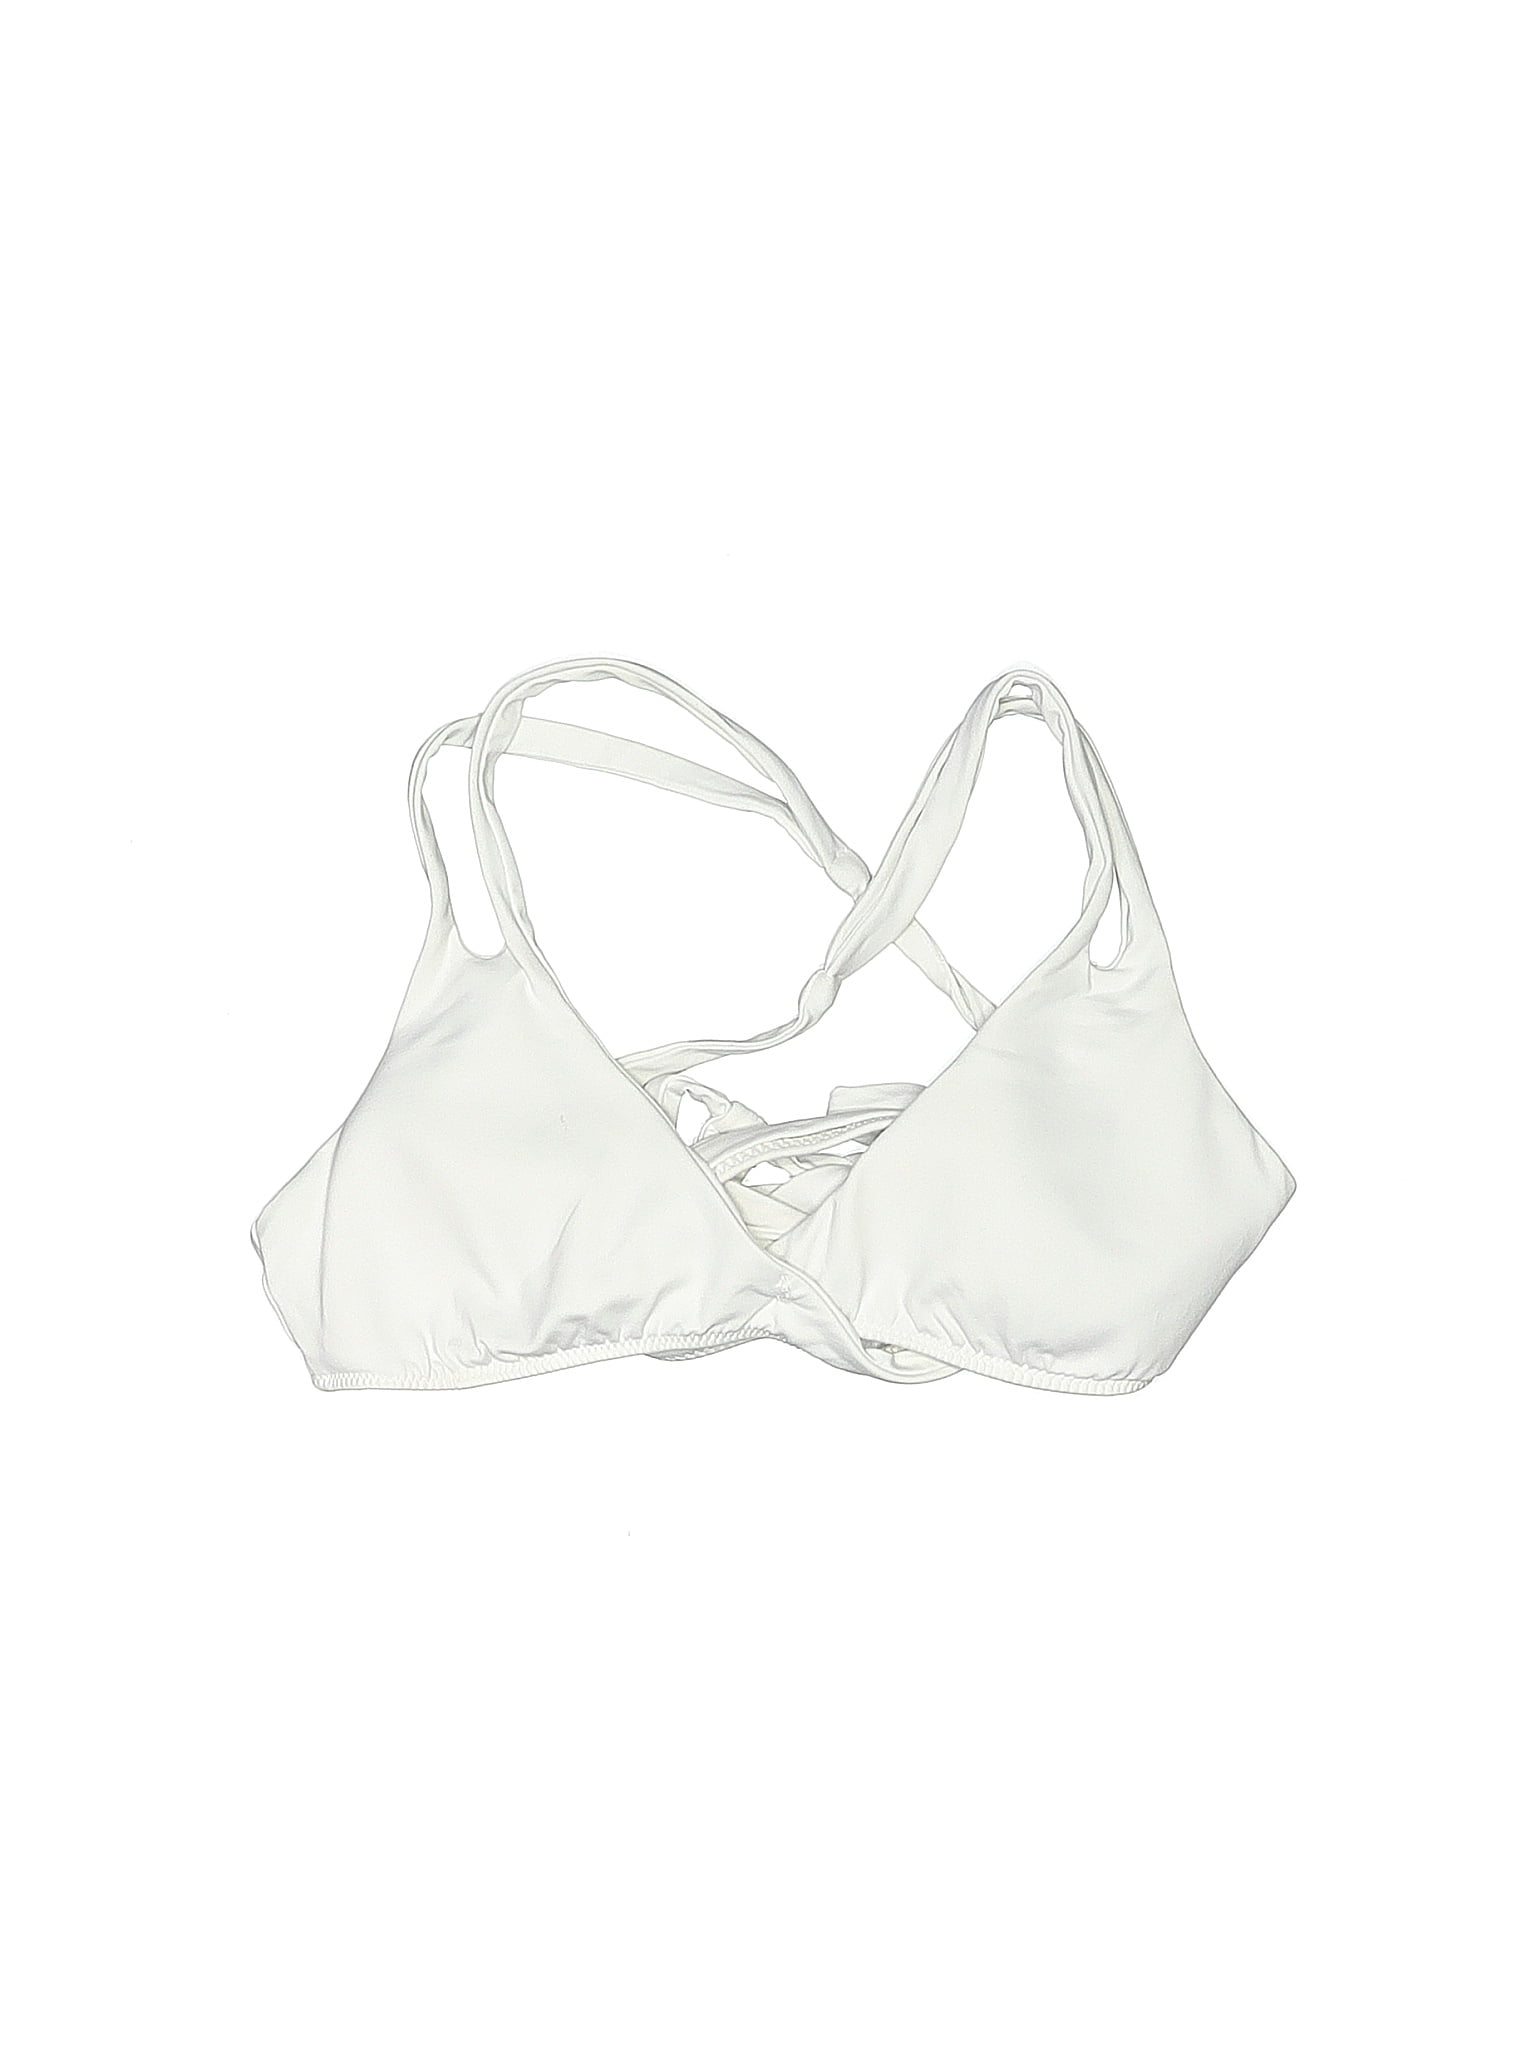 Becca Solid White Ivory Swimsuit Top Size M - 57% off